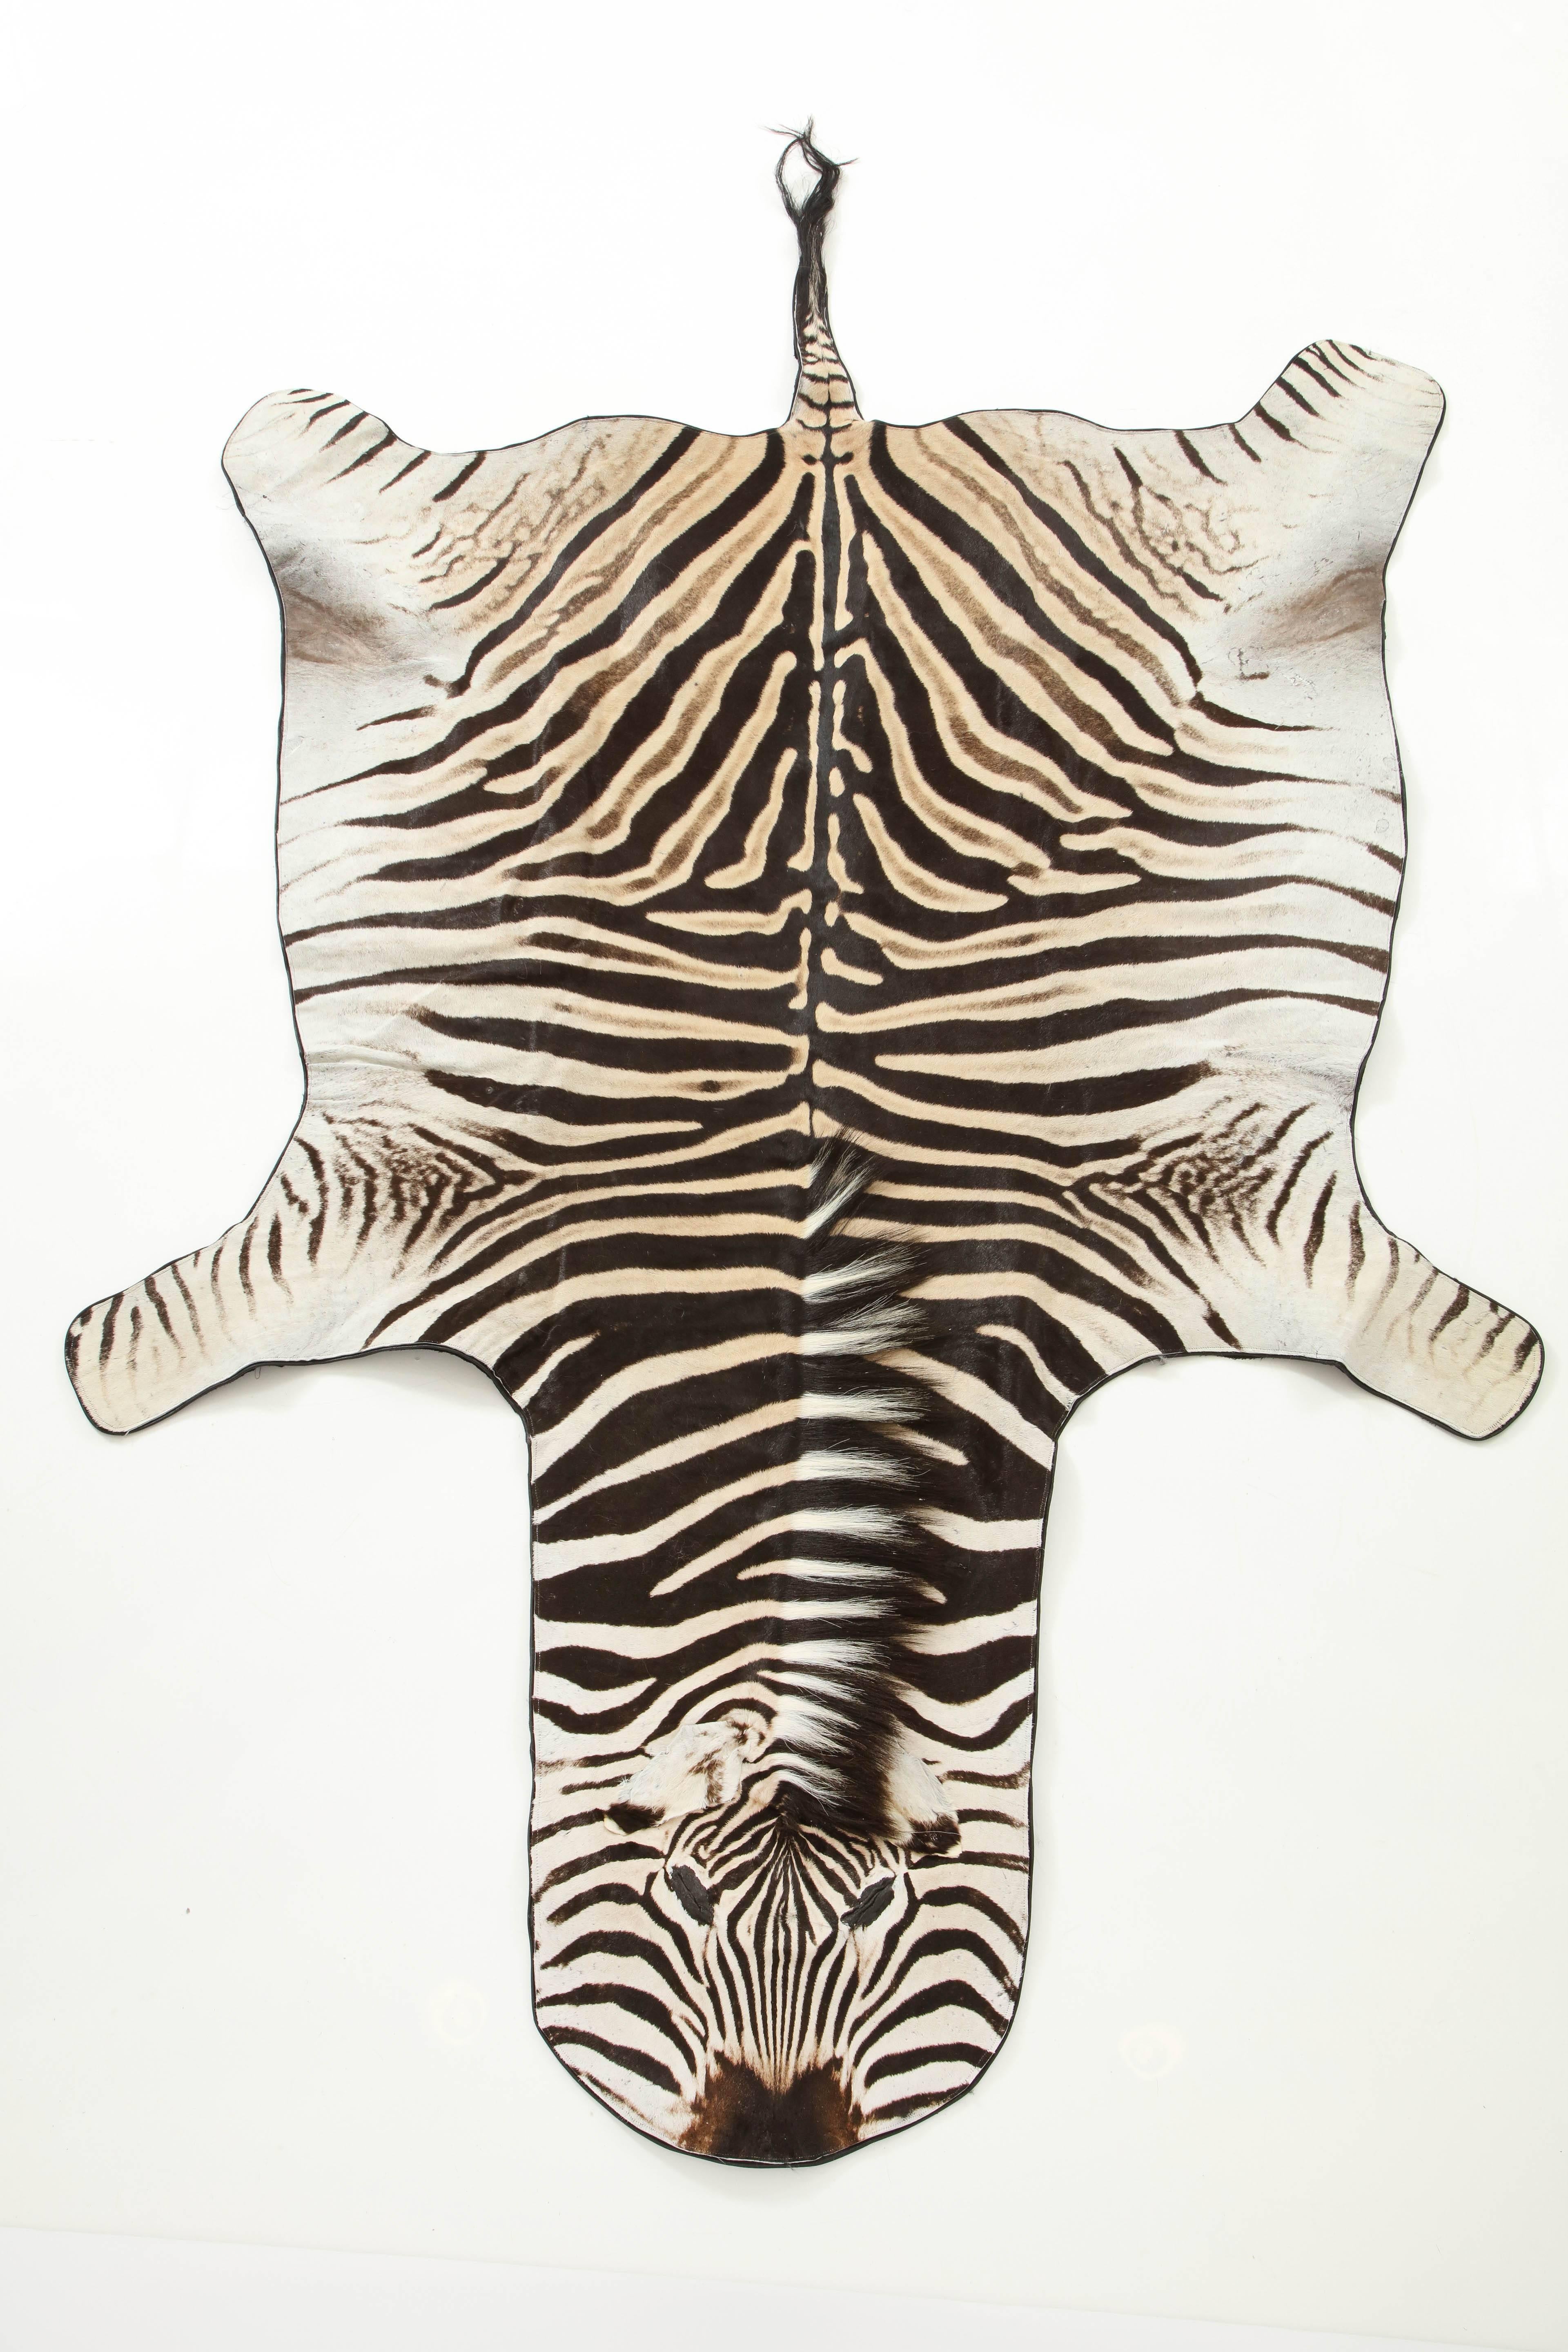 Decorative zebra hide. It is backed with a wool felt and has a leather trimming around the hide.